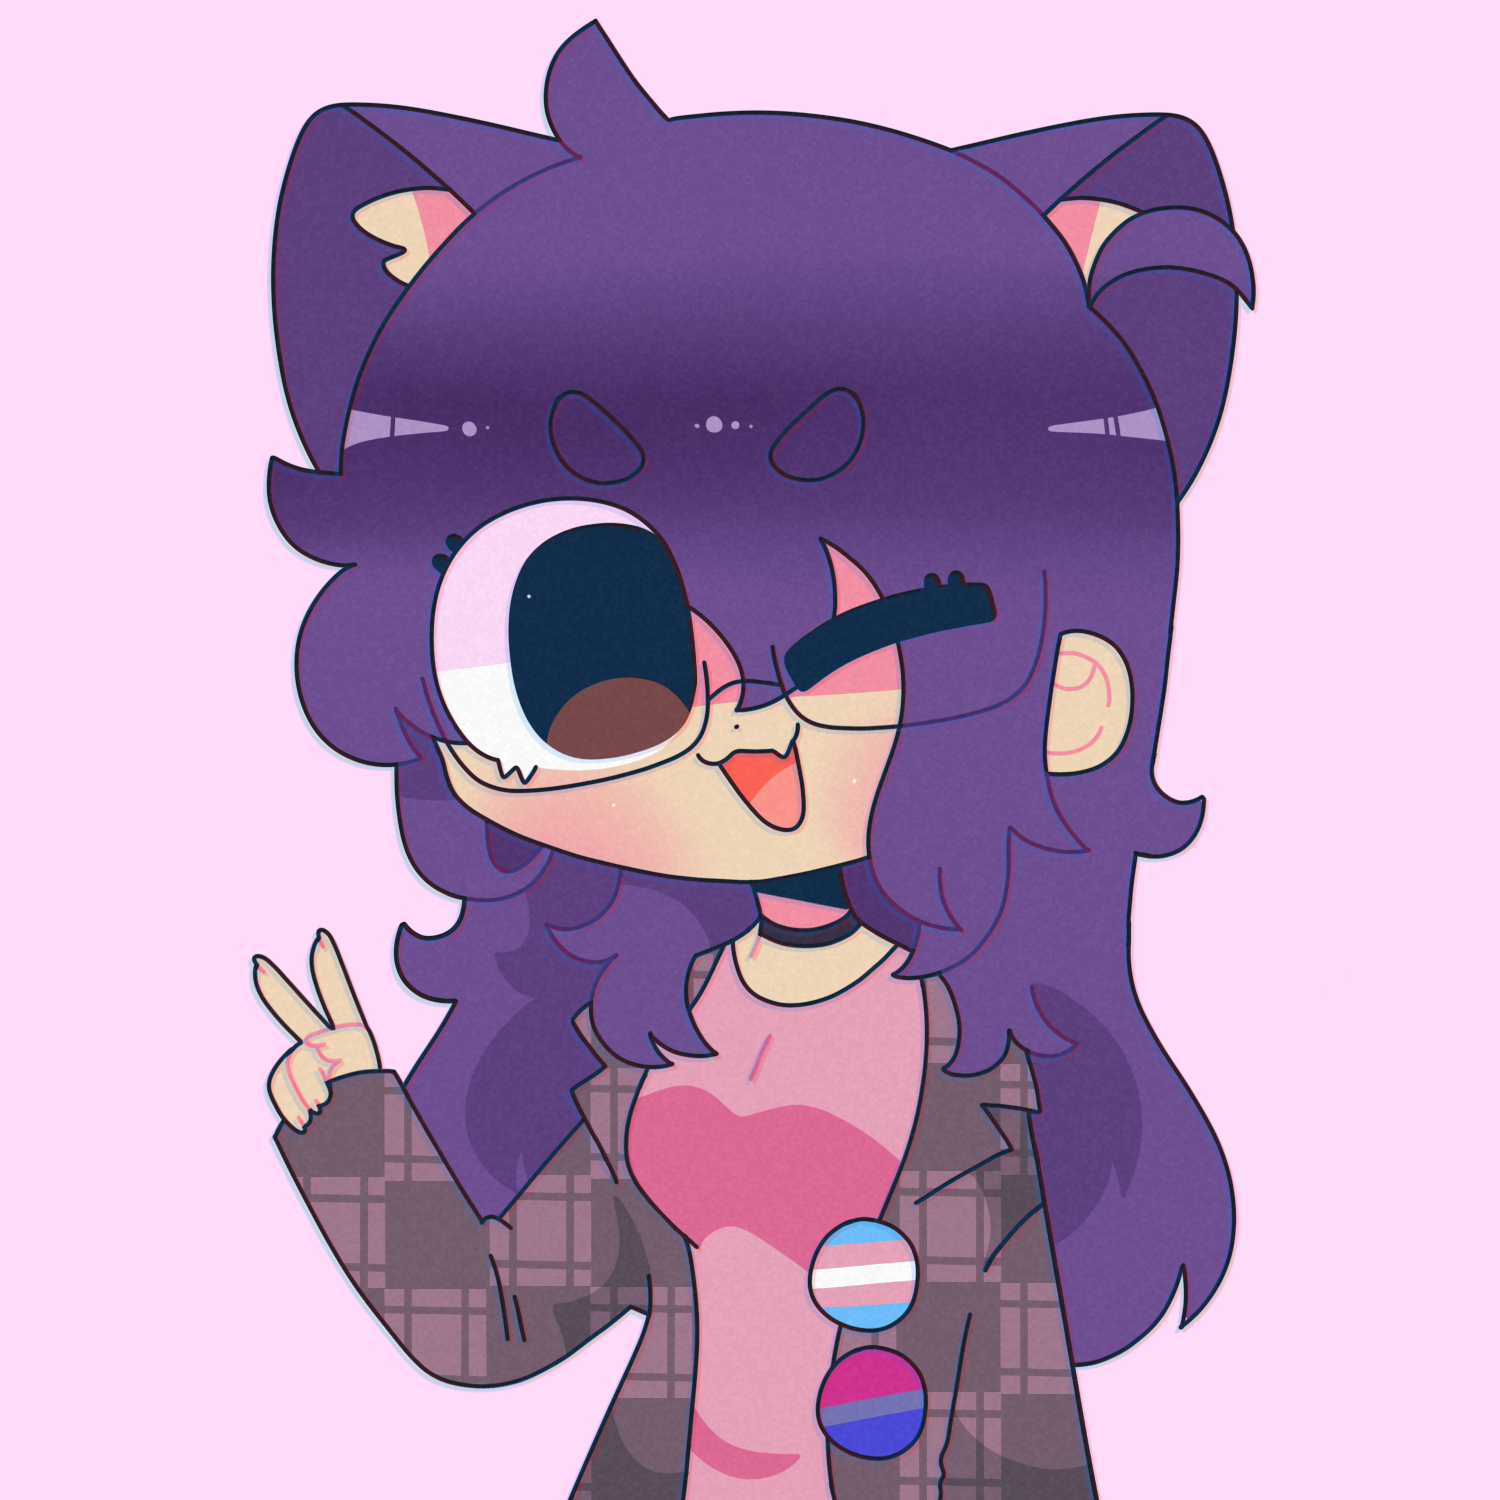 a catgirl with purple ears, based on the previous picrew